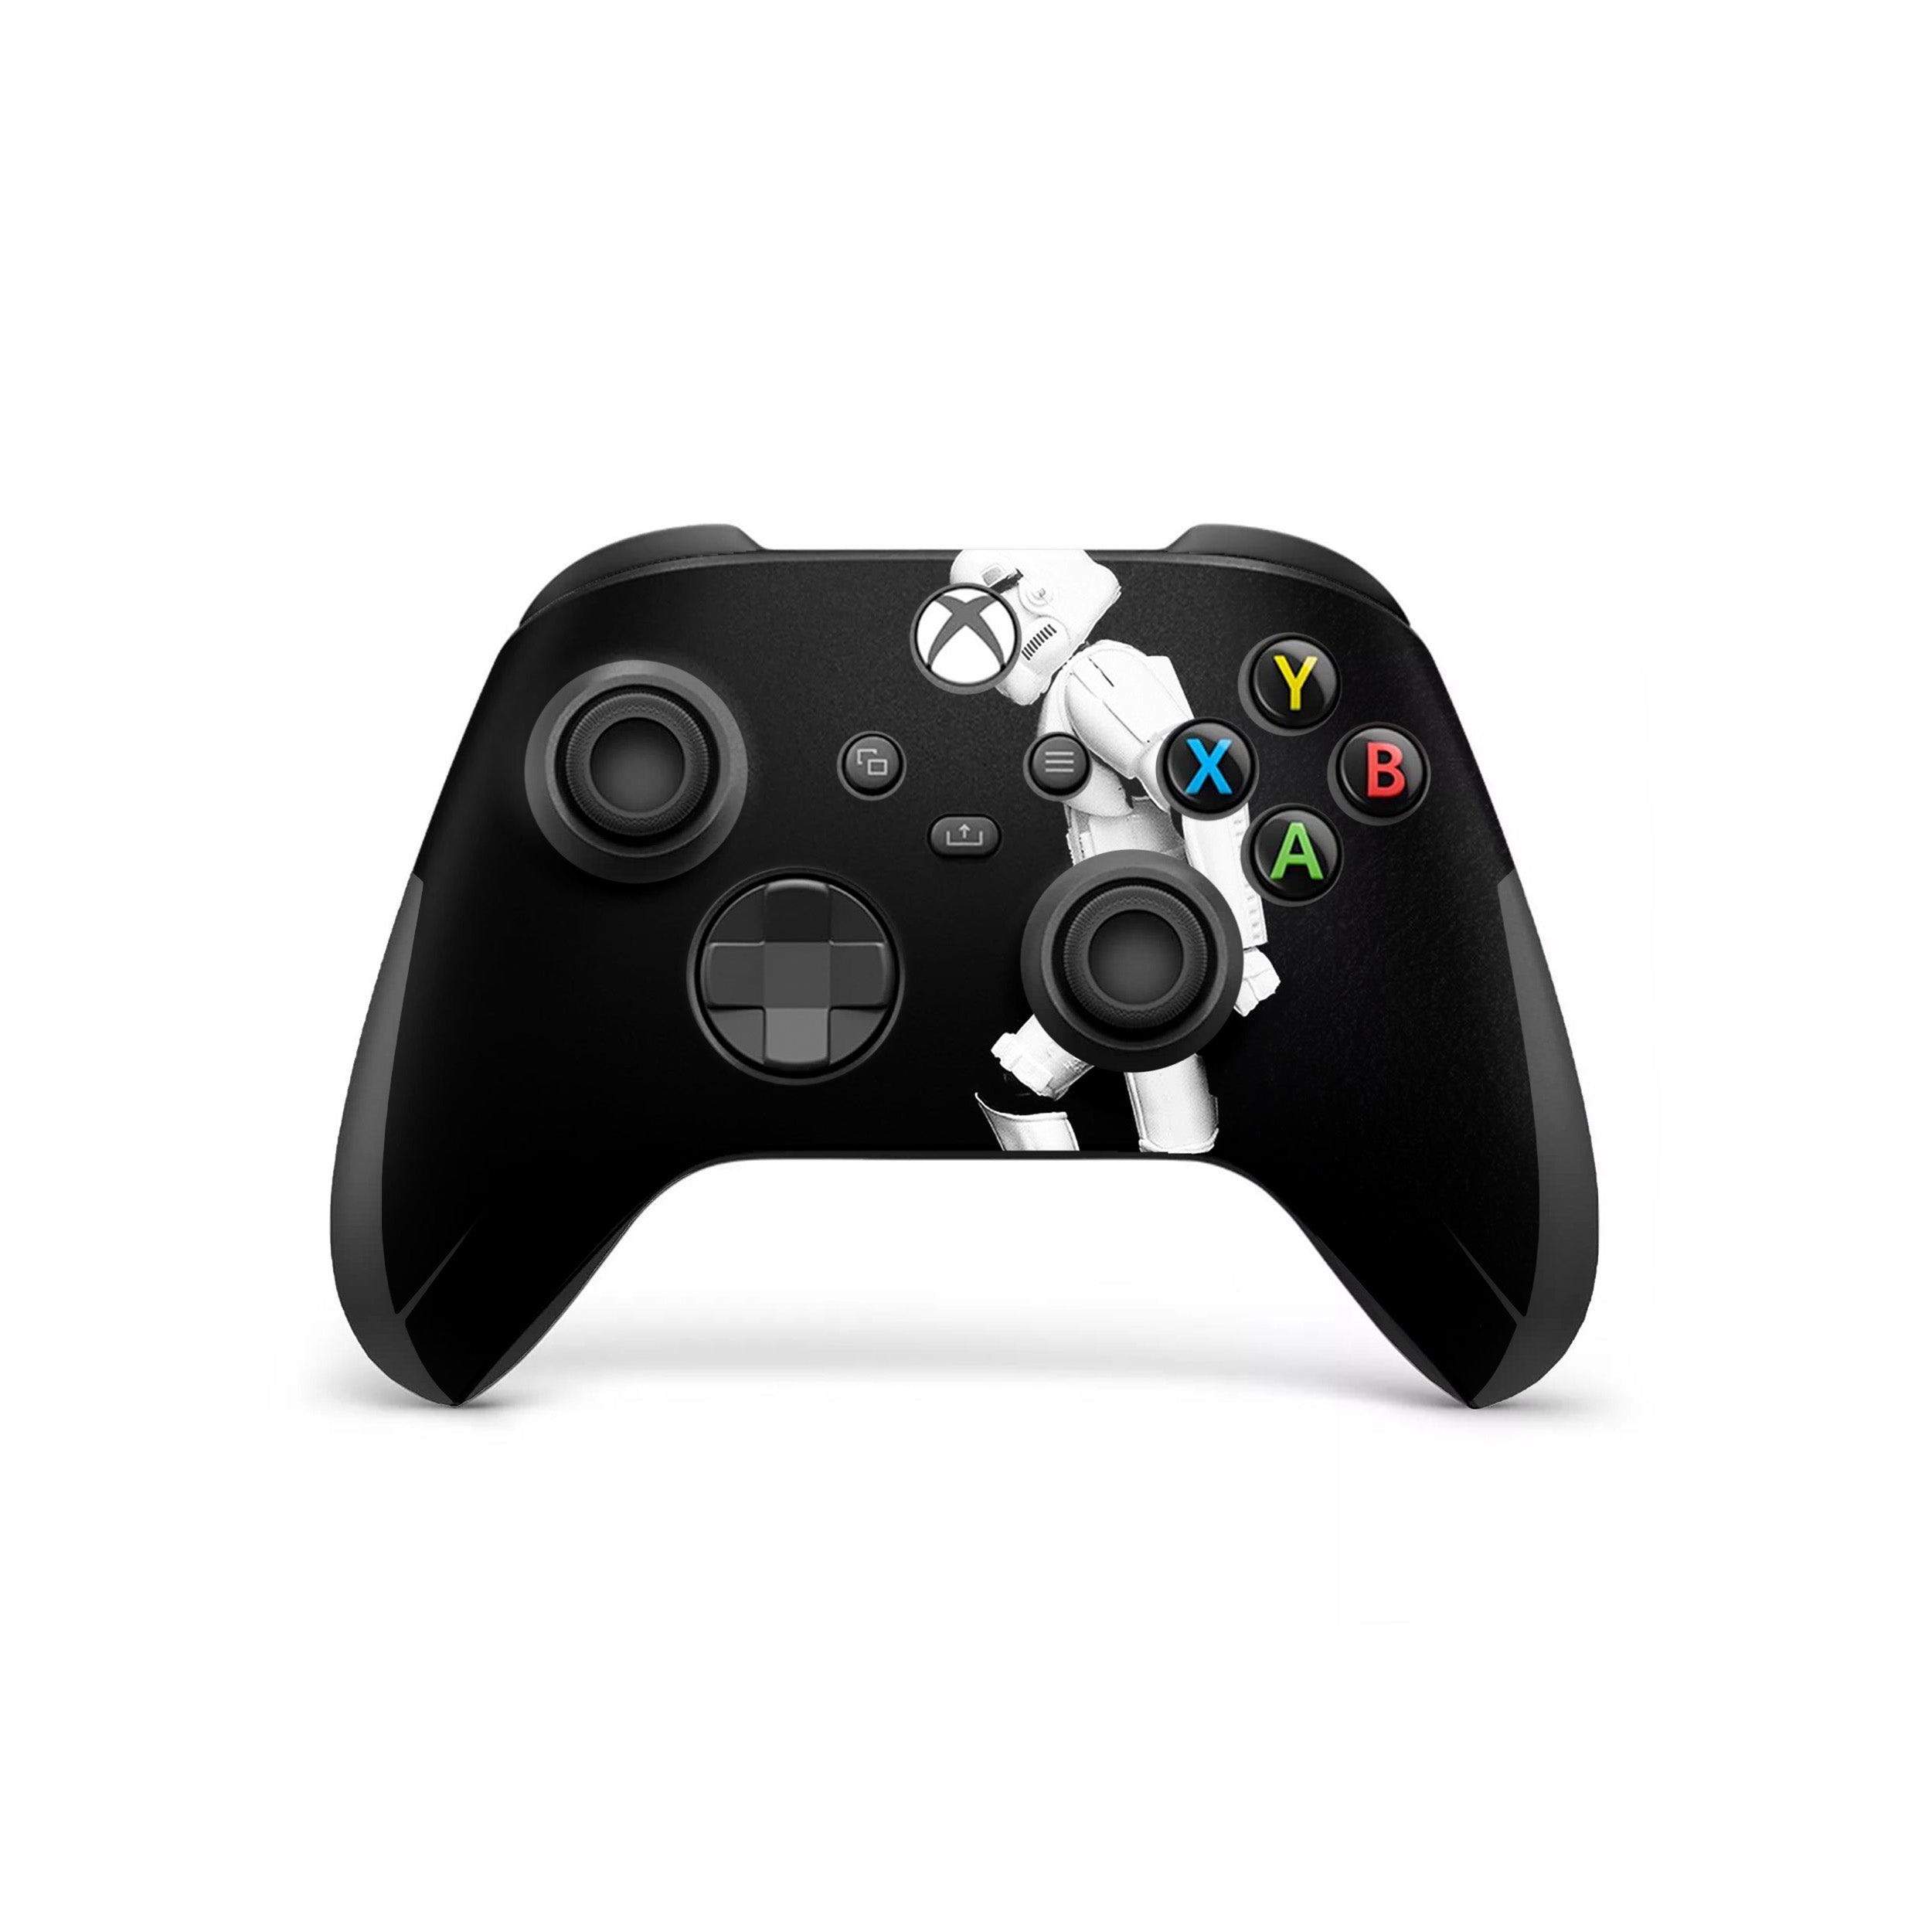 A video game skin featuring a Star Wars Storm Trooper design for the Xbox Wireless Controller.